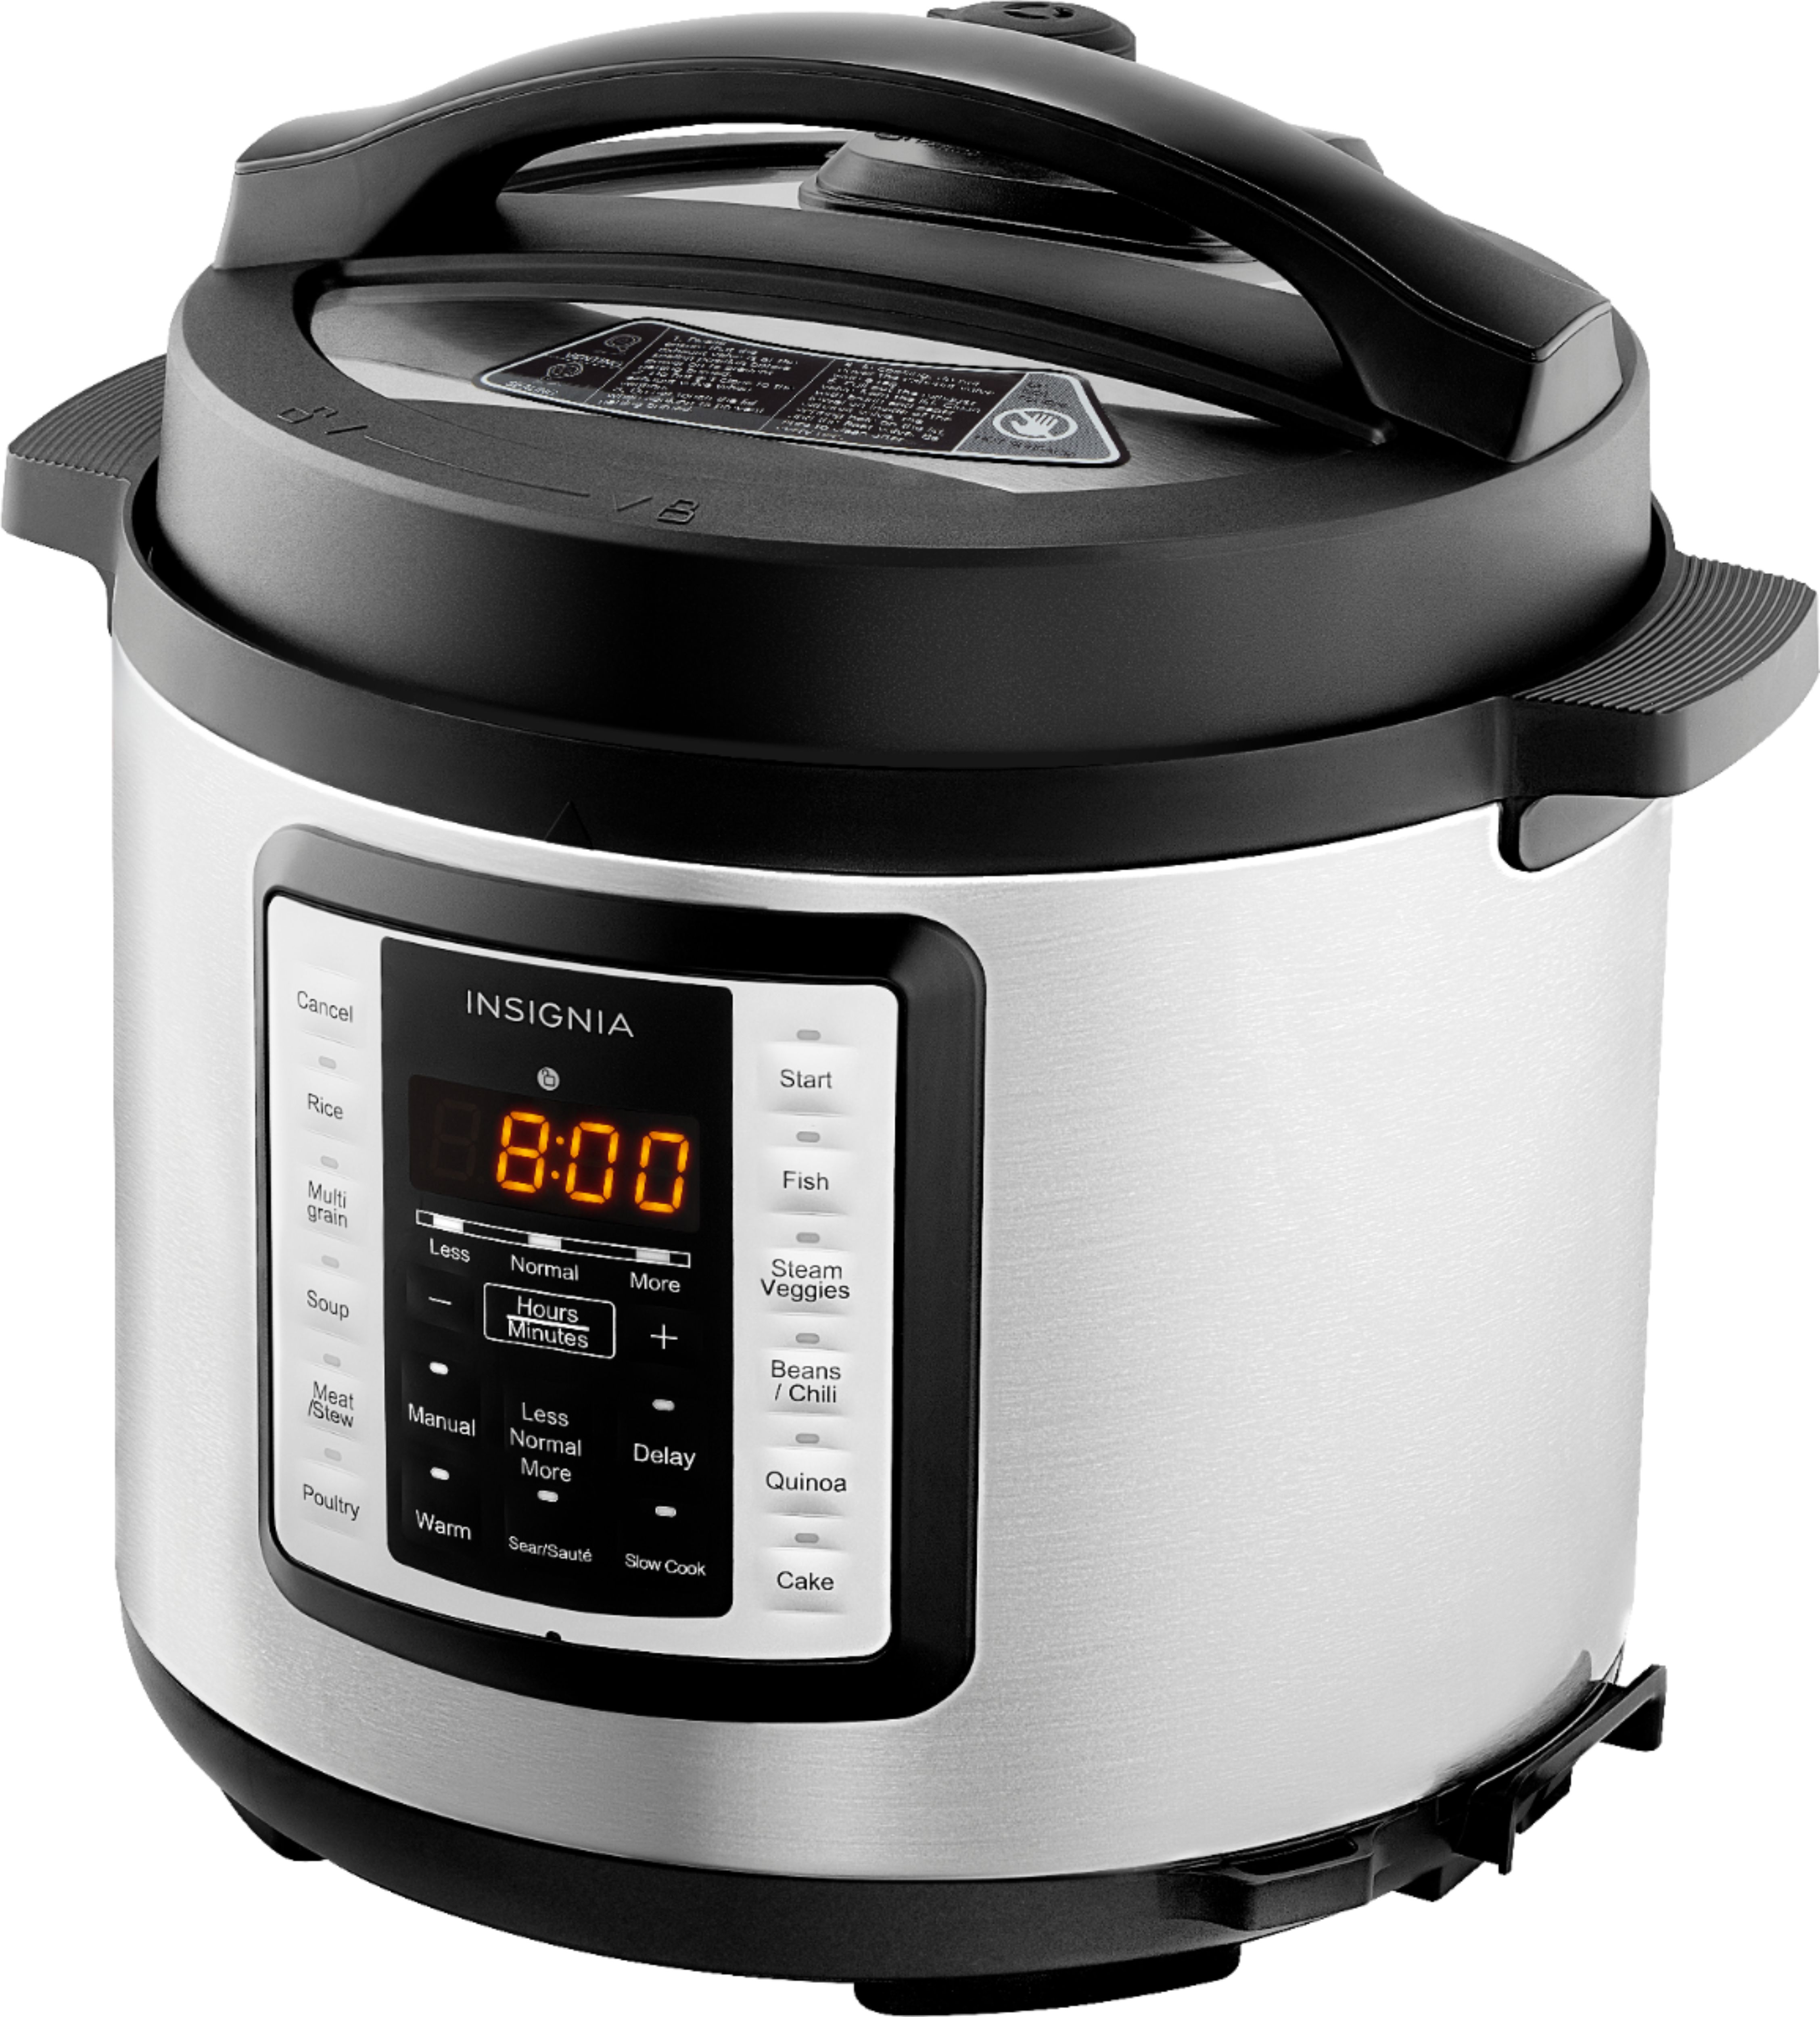 Insignia™ - 6qt Multi-Function Pressure Cooker - Stainless Steel, $24.99, Best Buy